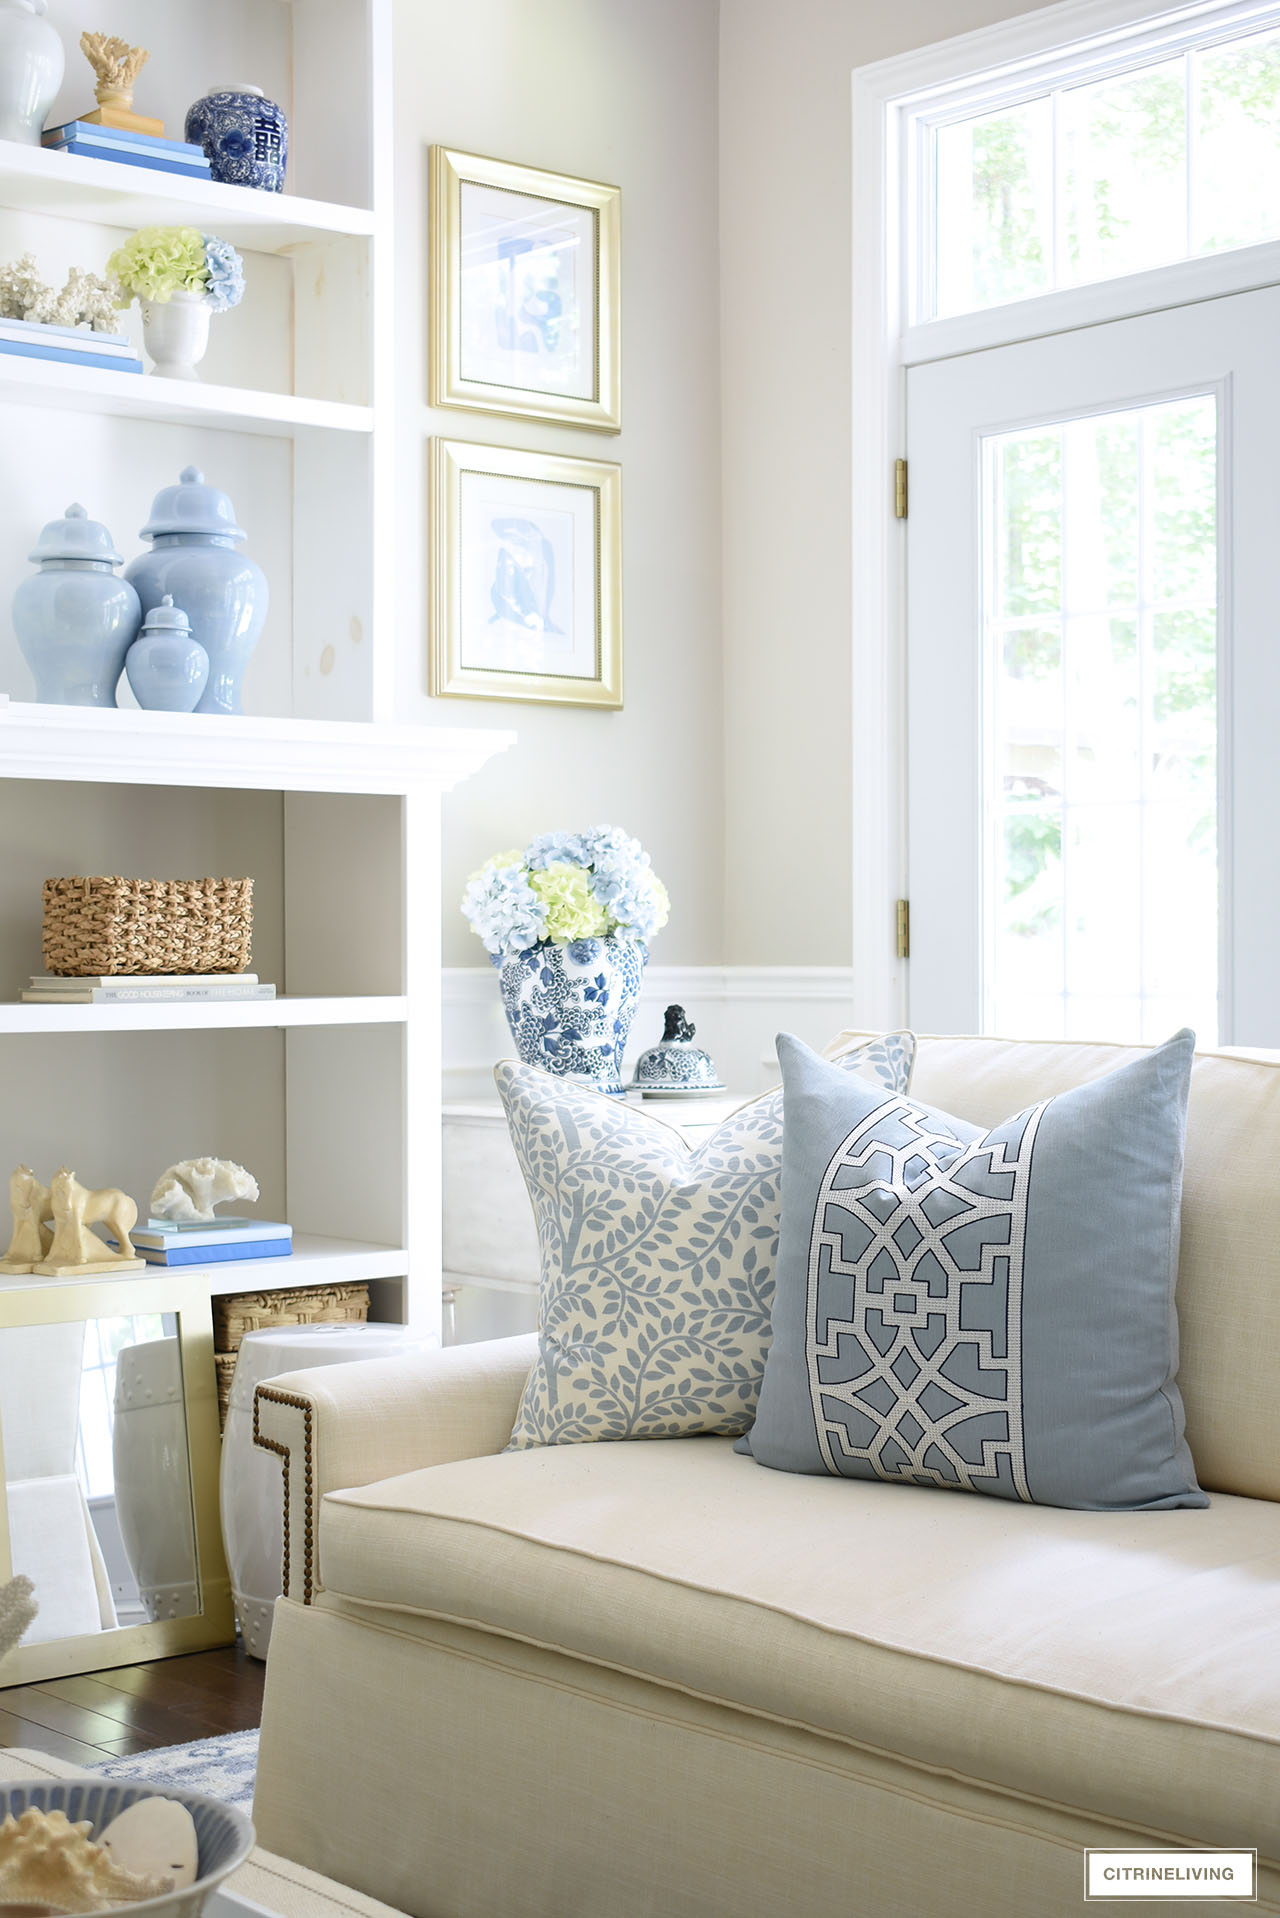 A living room corner styled for summer with faux hydrangeas, blue and white accents and designer pillows on a white sofa.